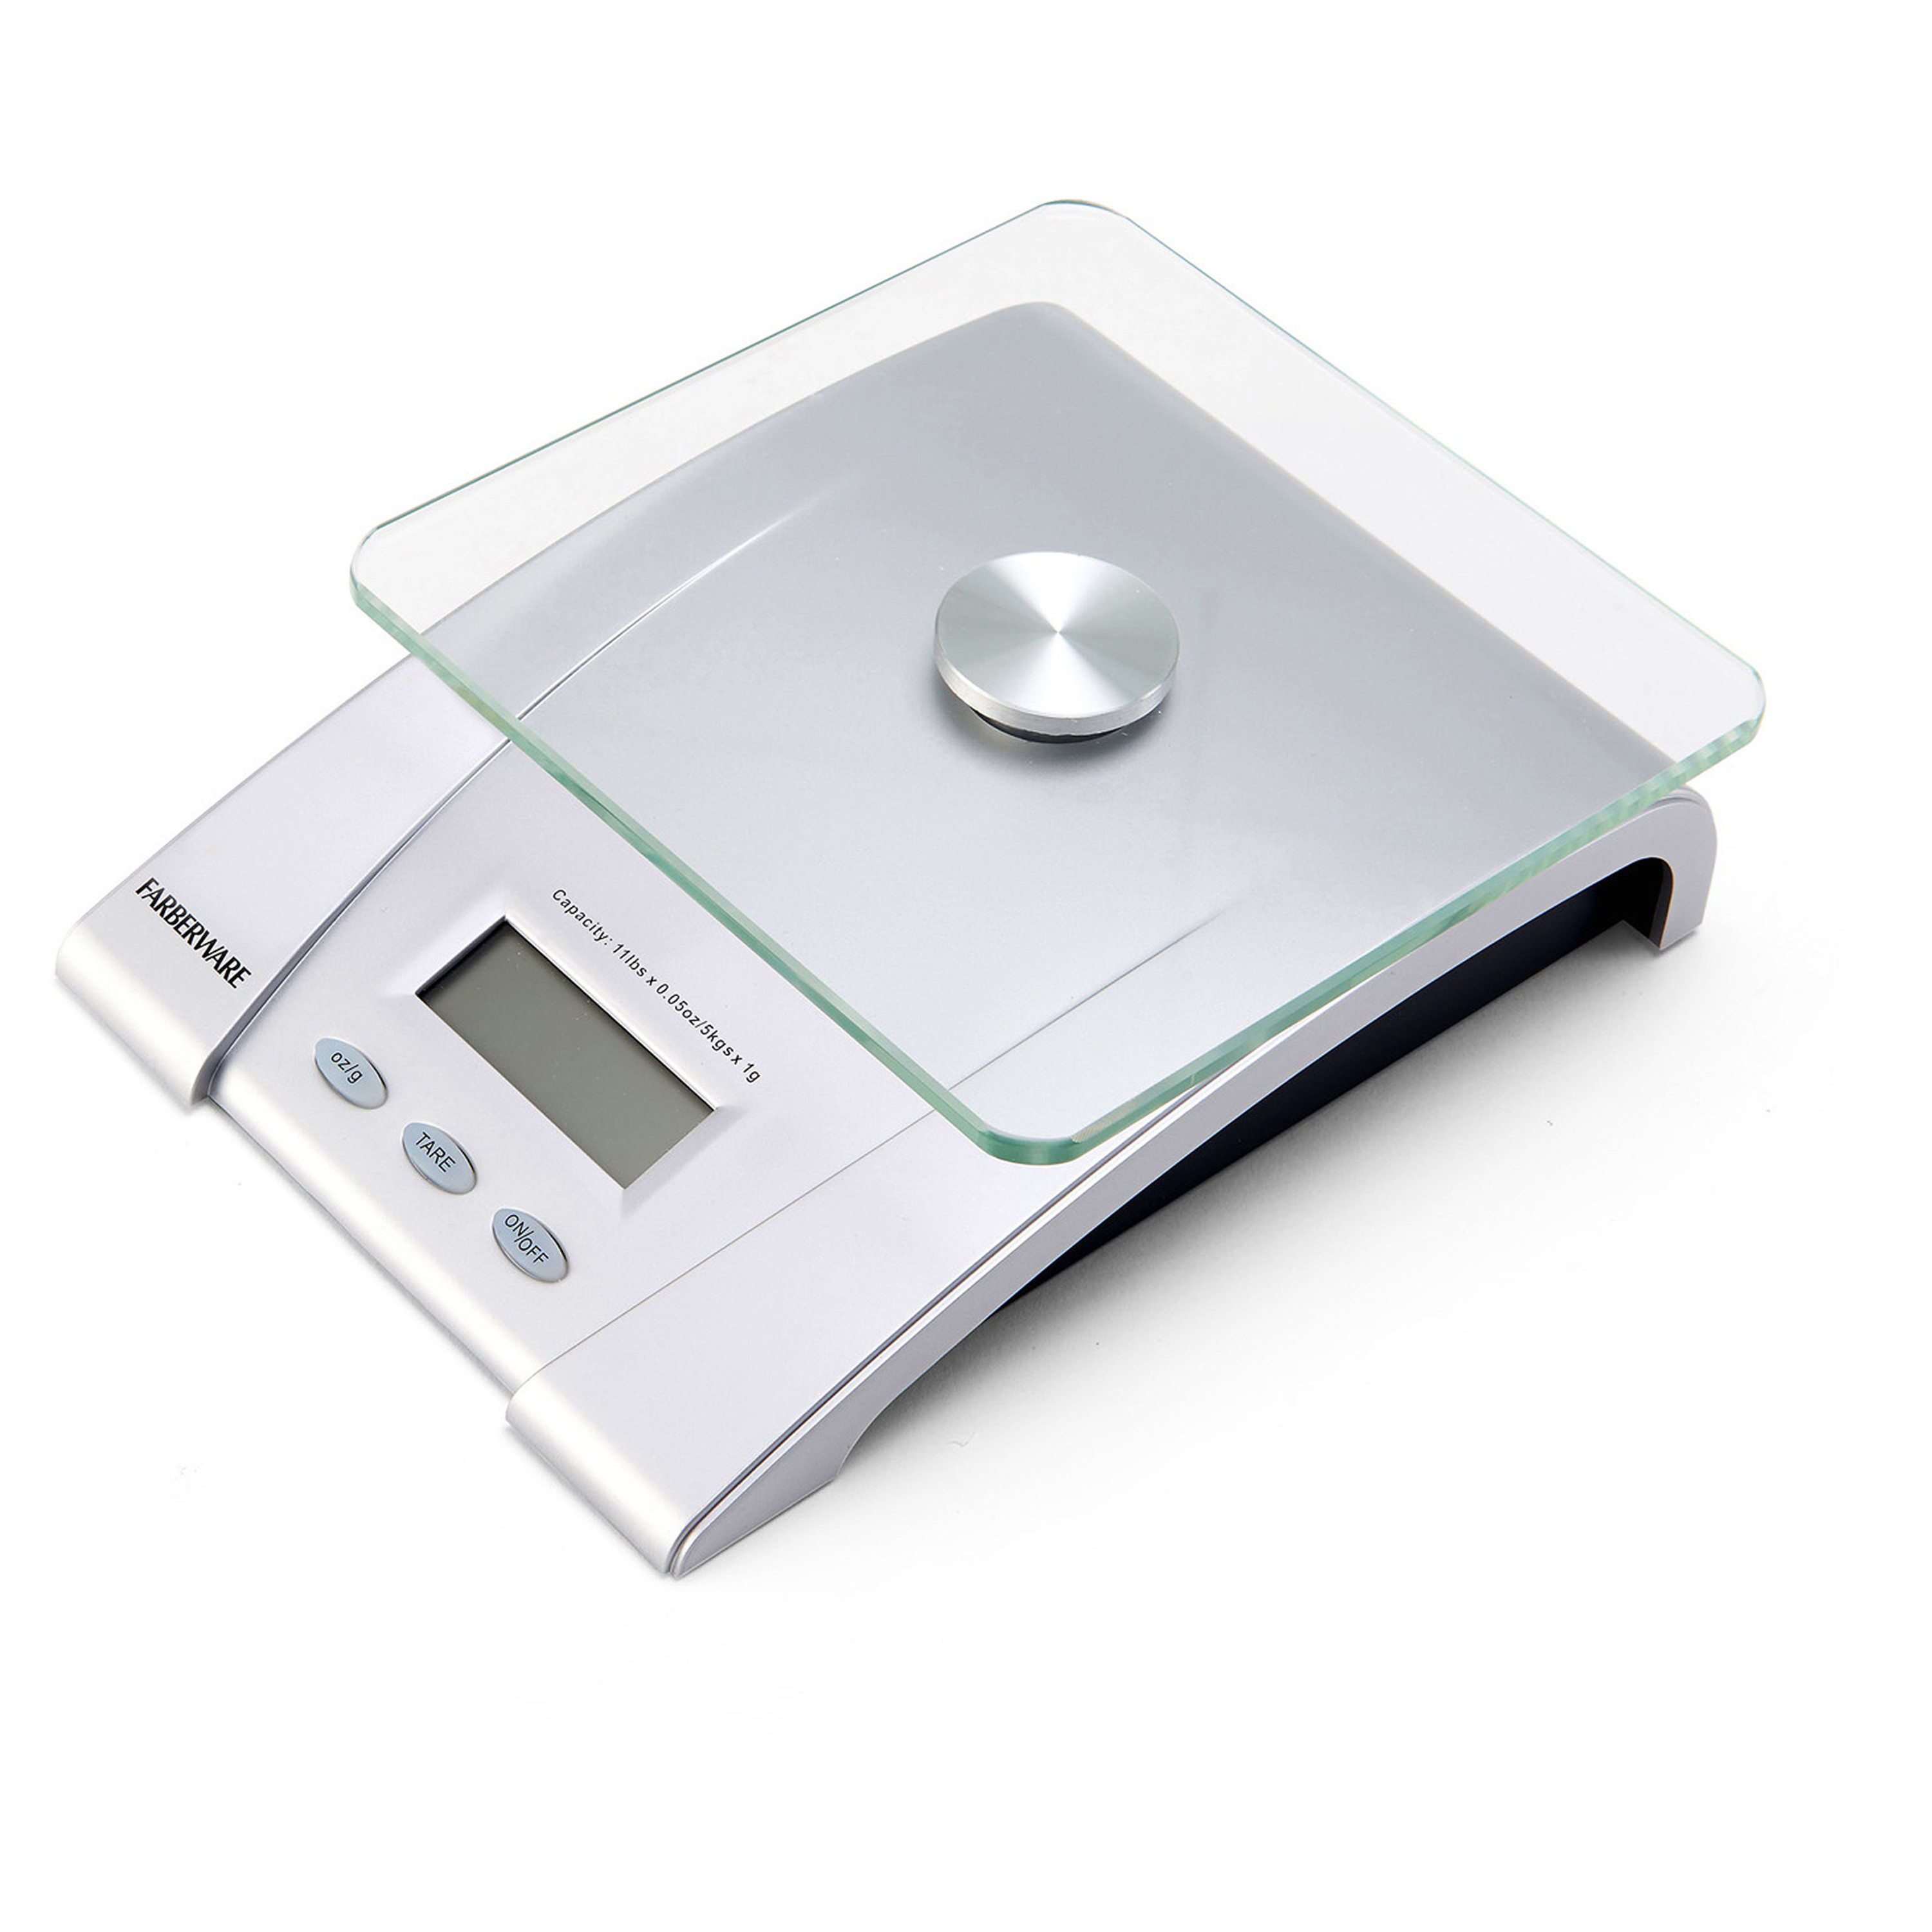 Farberware Professional Electronic Glass Top Kitchen Scale - image 5 of 9